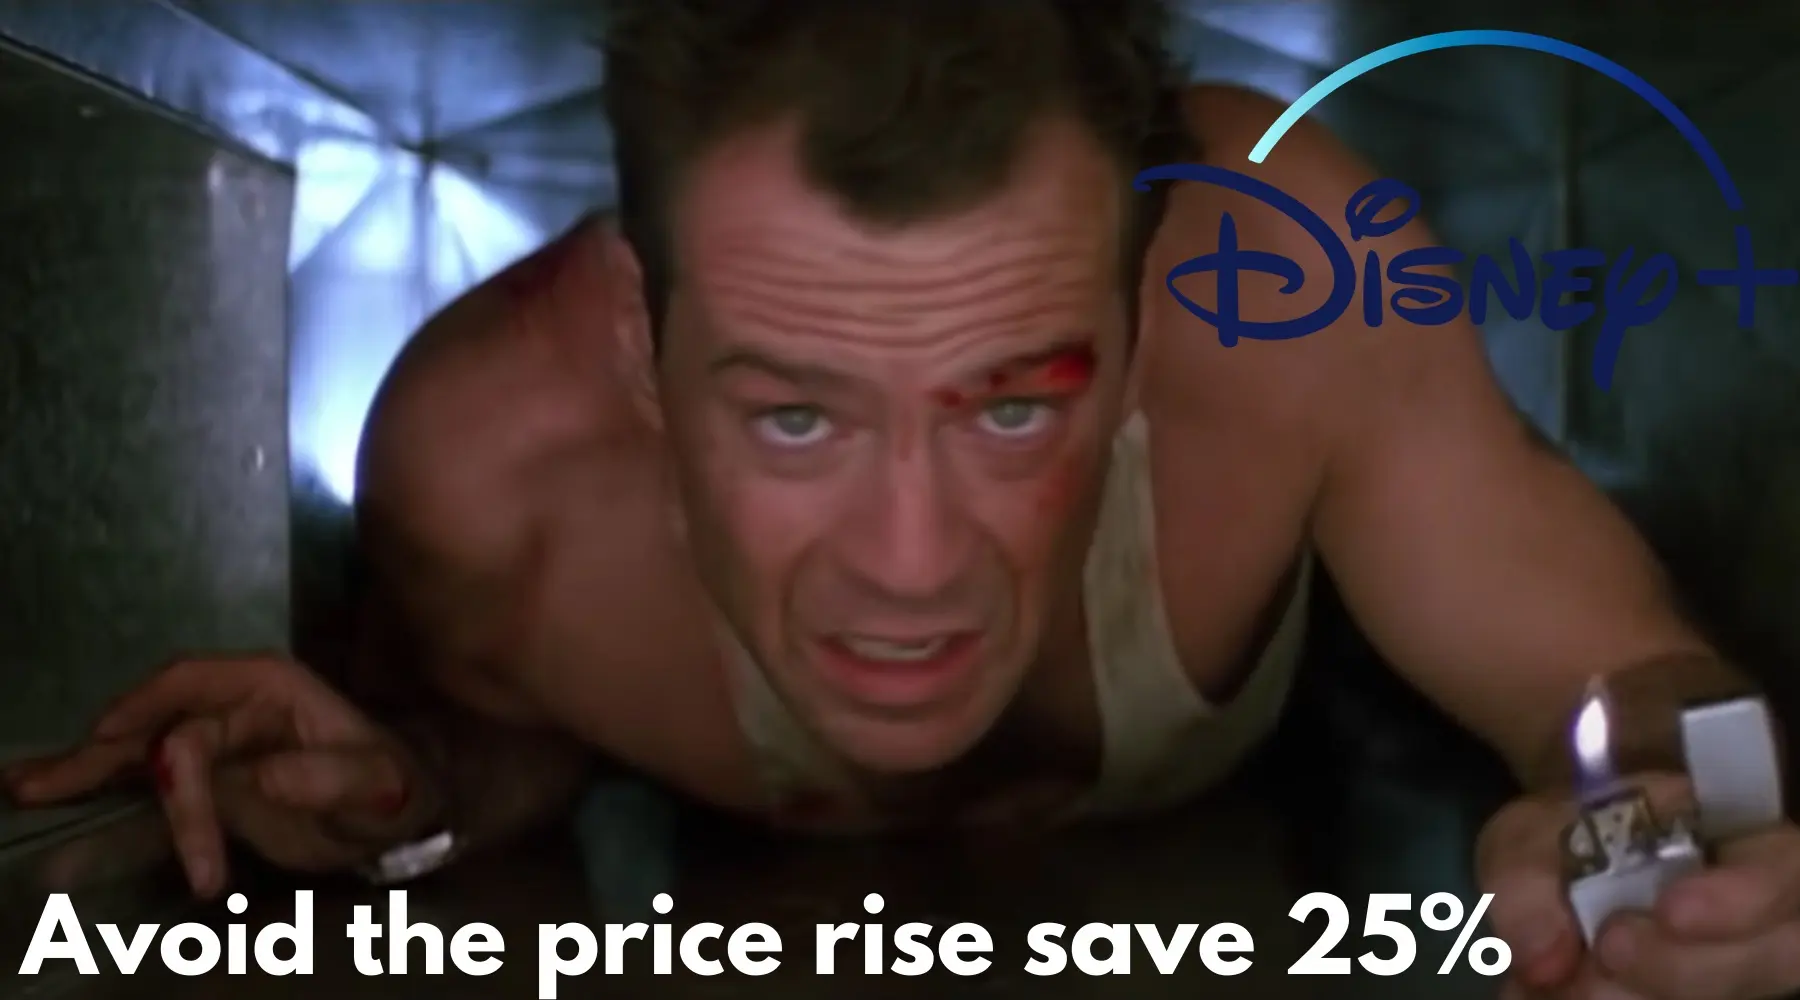 Disney+ price rise: How to avoid a 25% increase